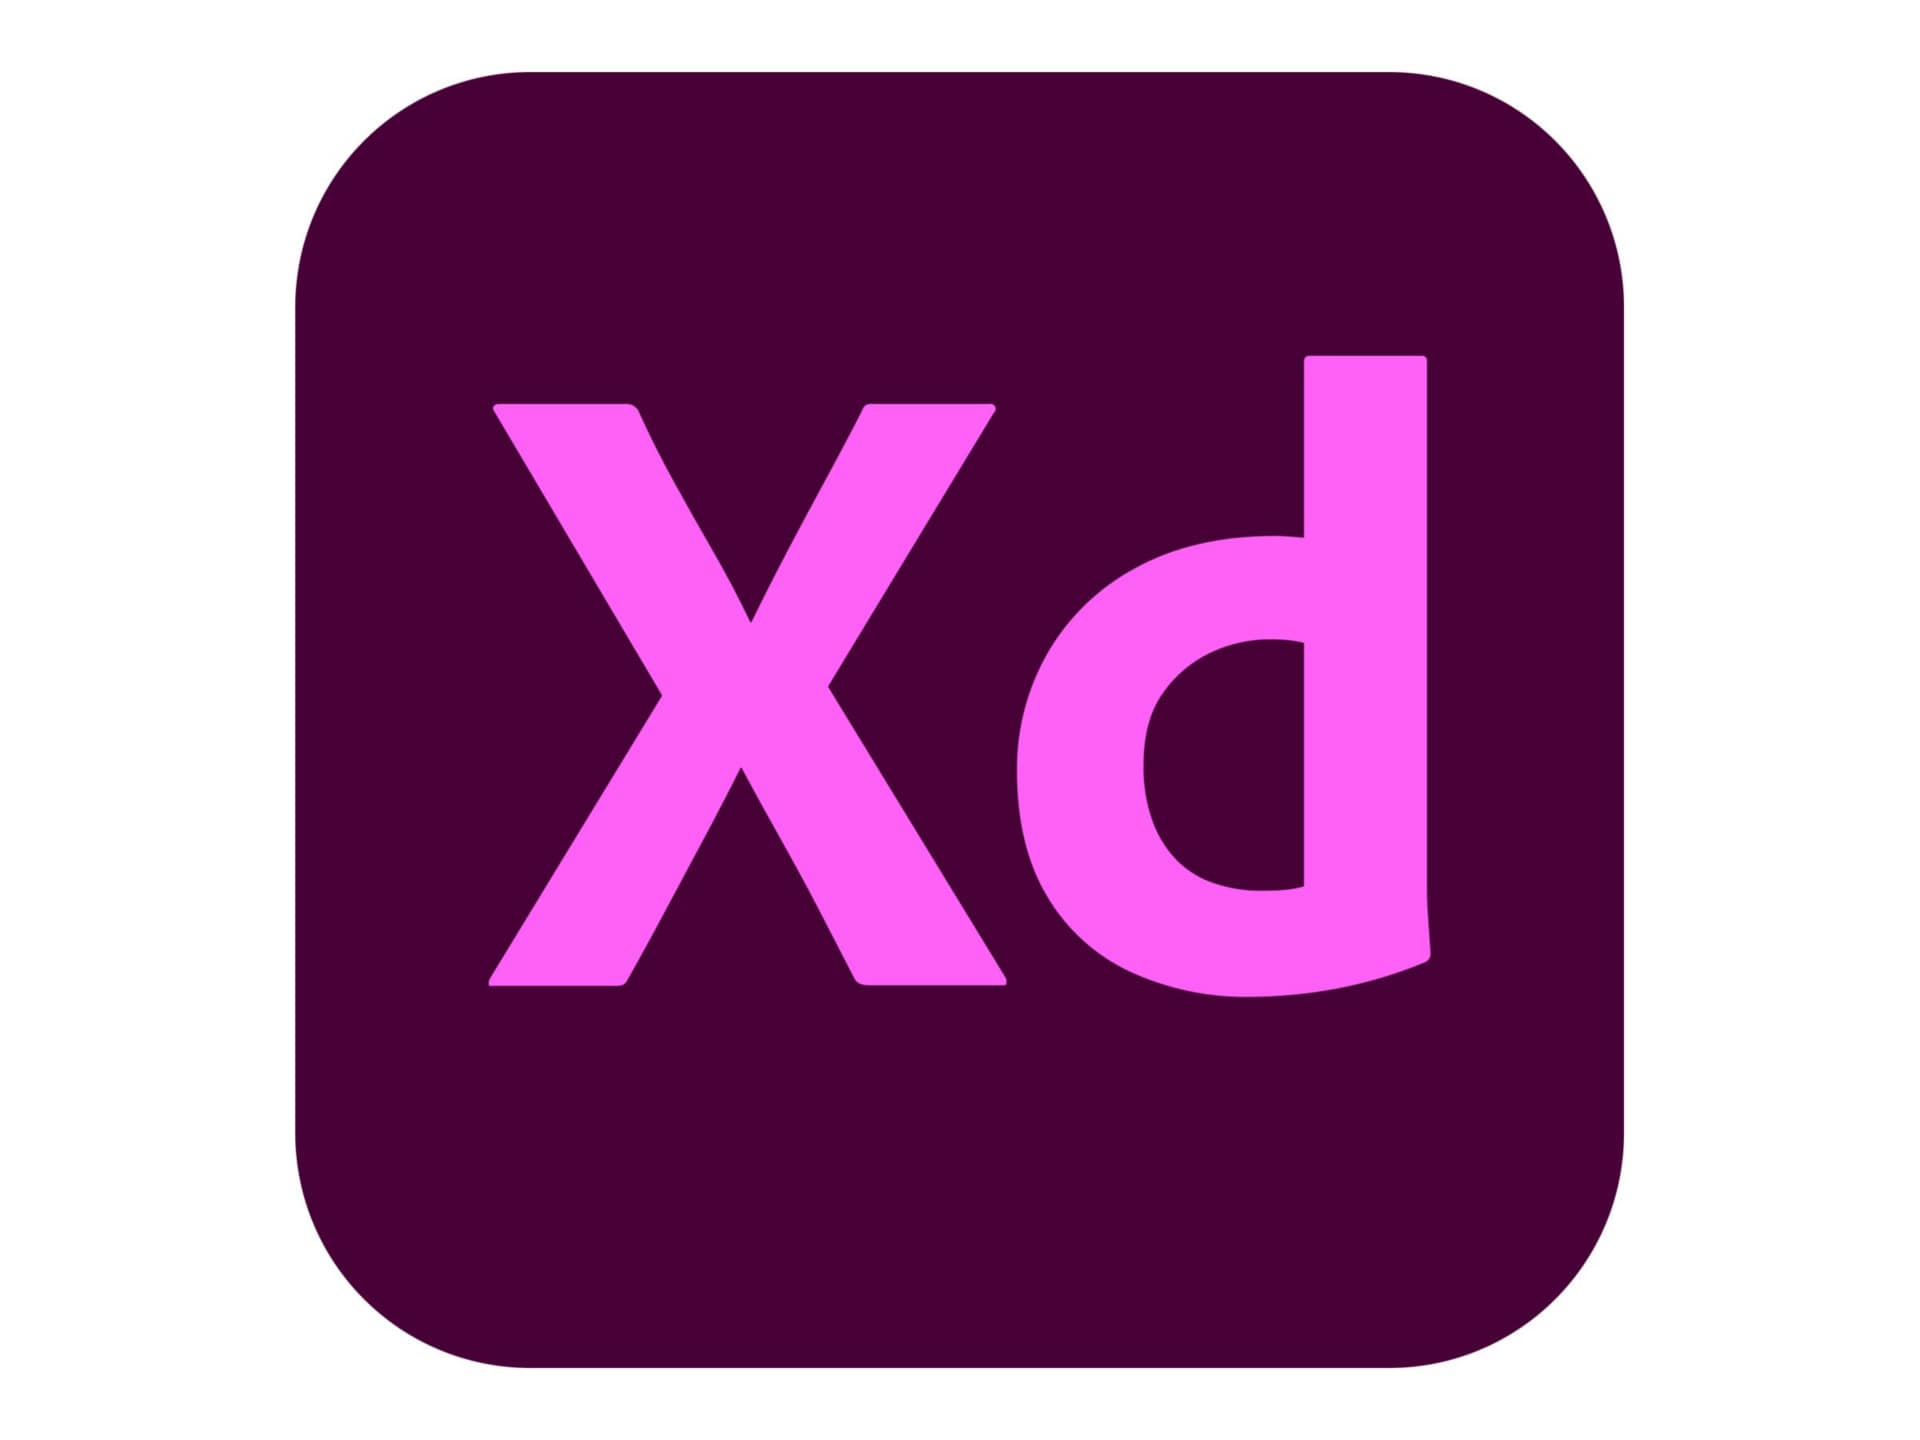 Adobe XD CC for Teams - Subscription New (3 months) - 1 named user